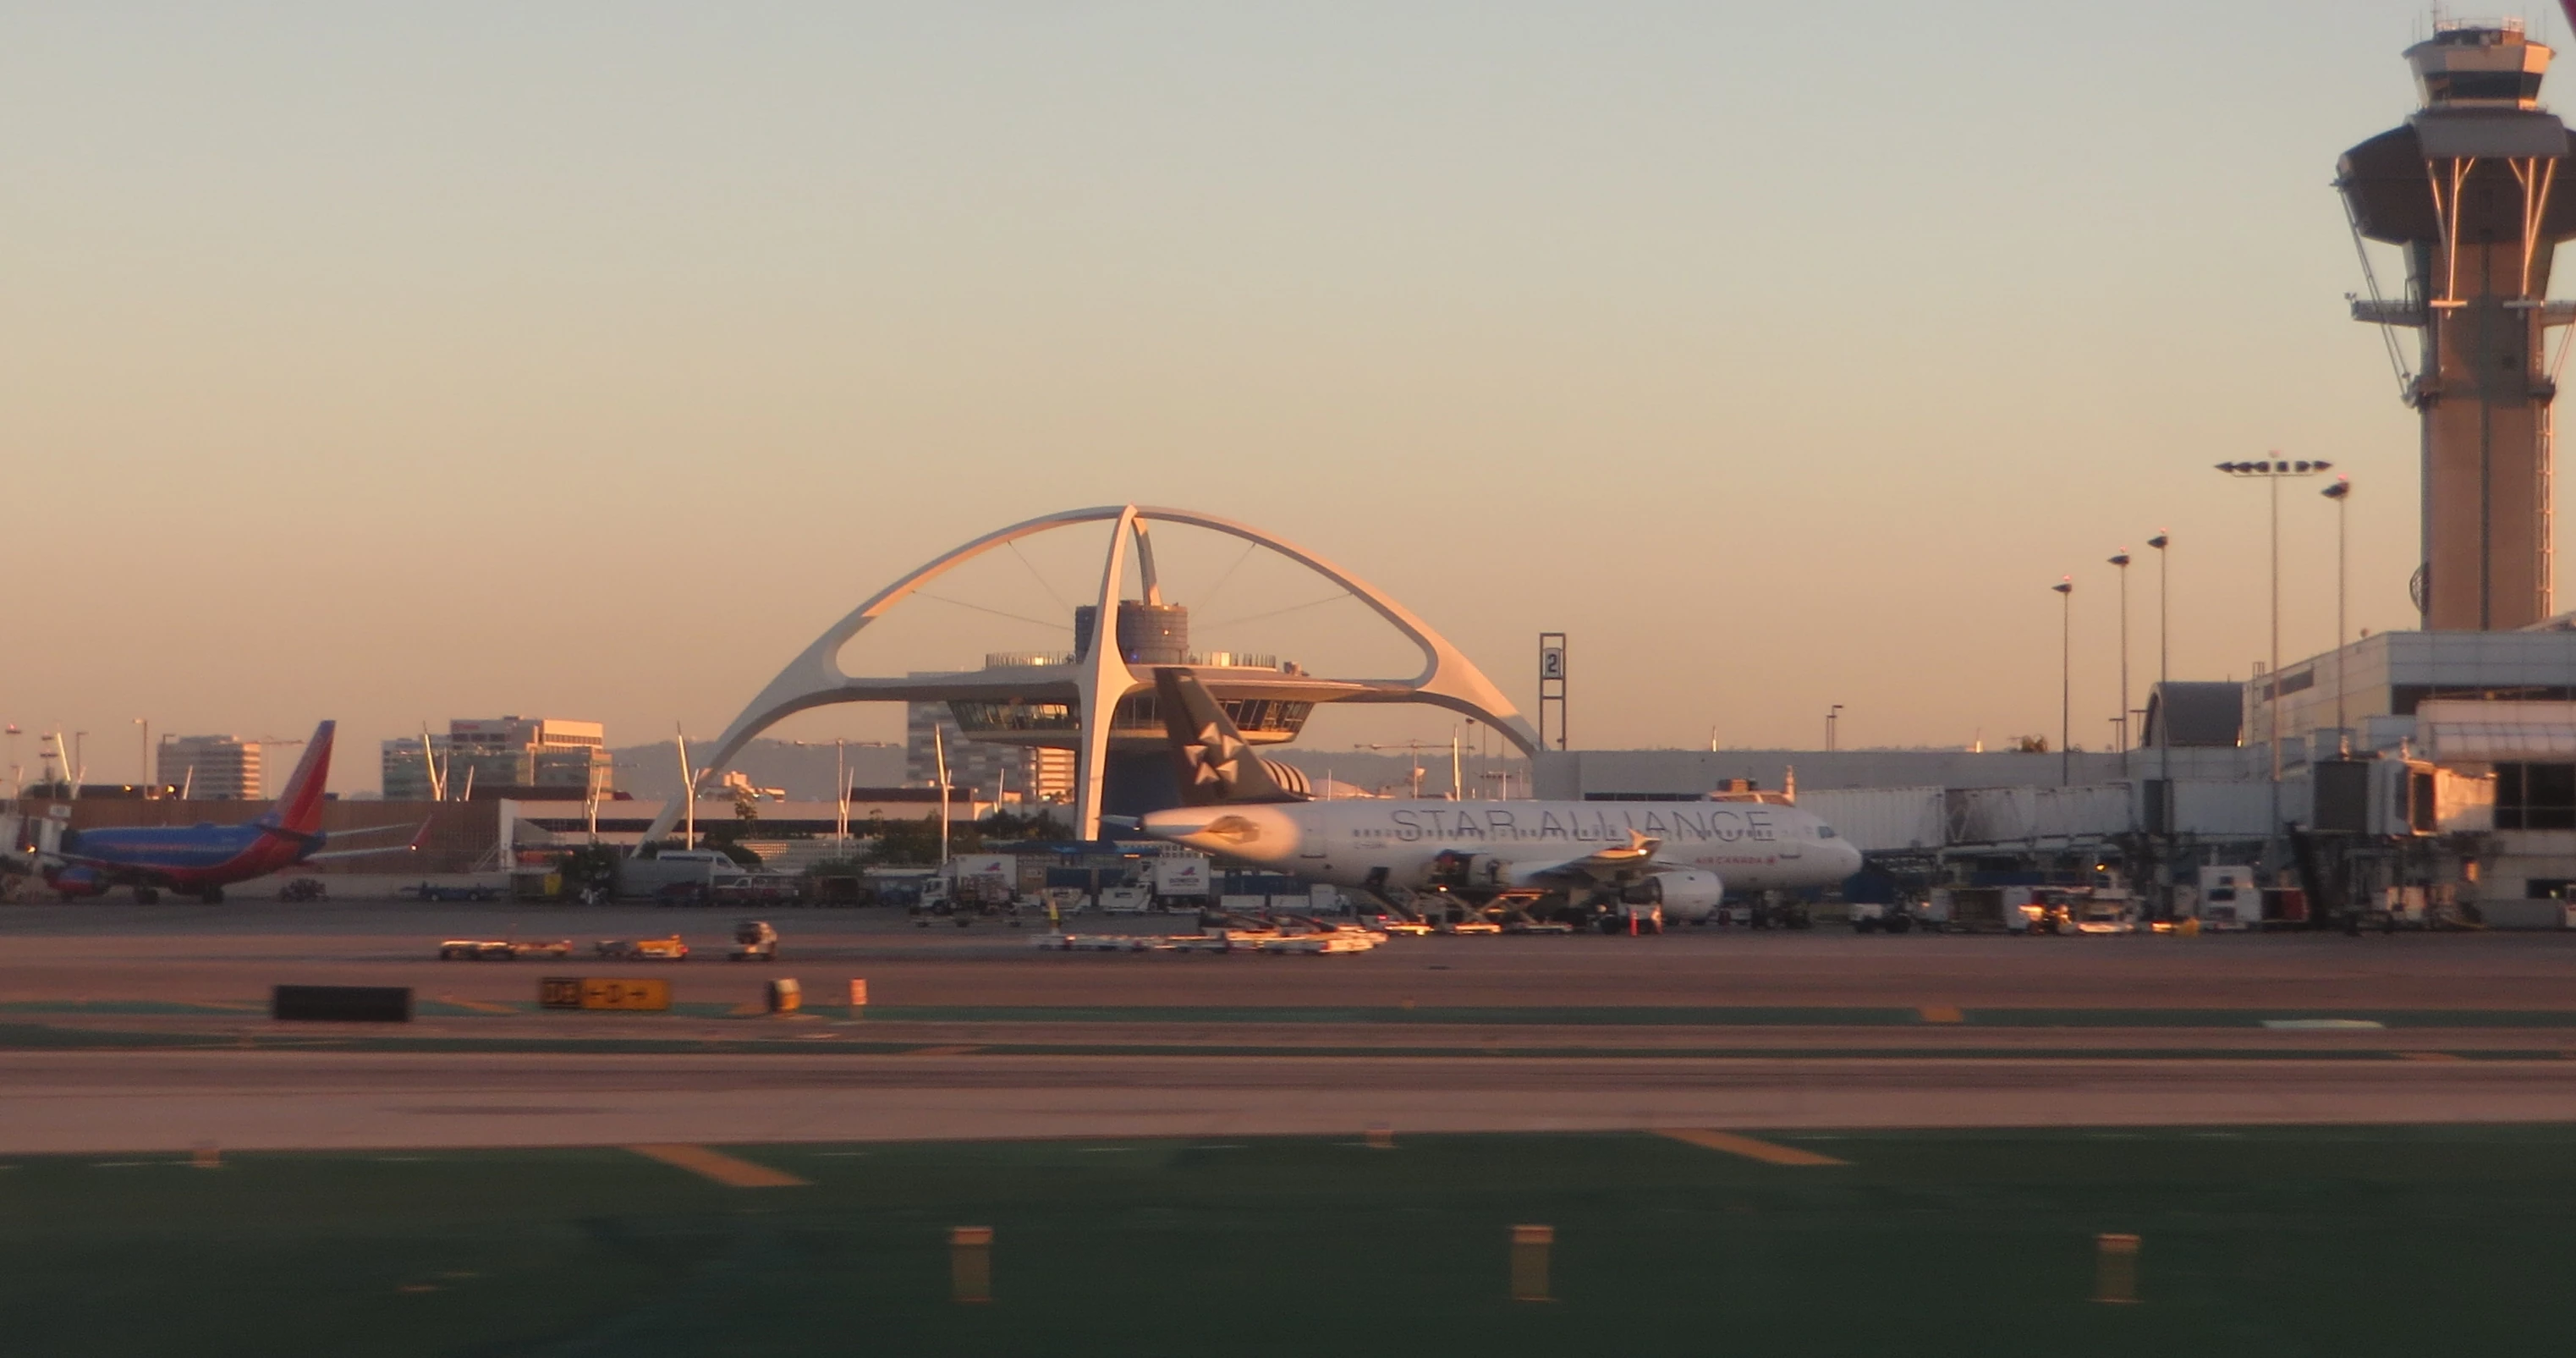 The Theme Building, Los Angeles International Airport, Los Angeles, California